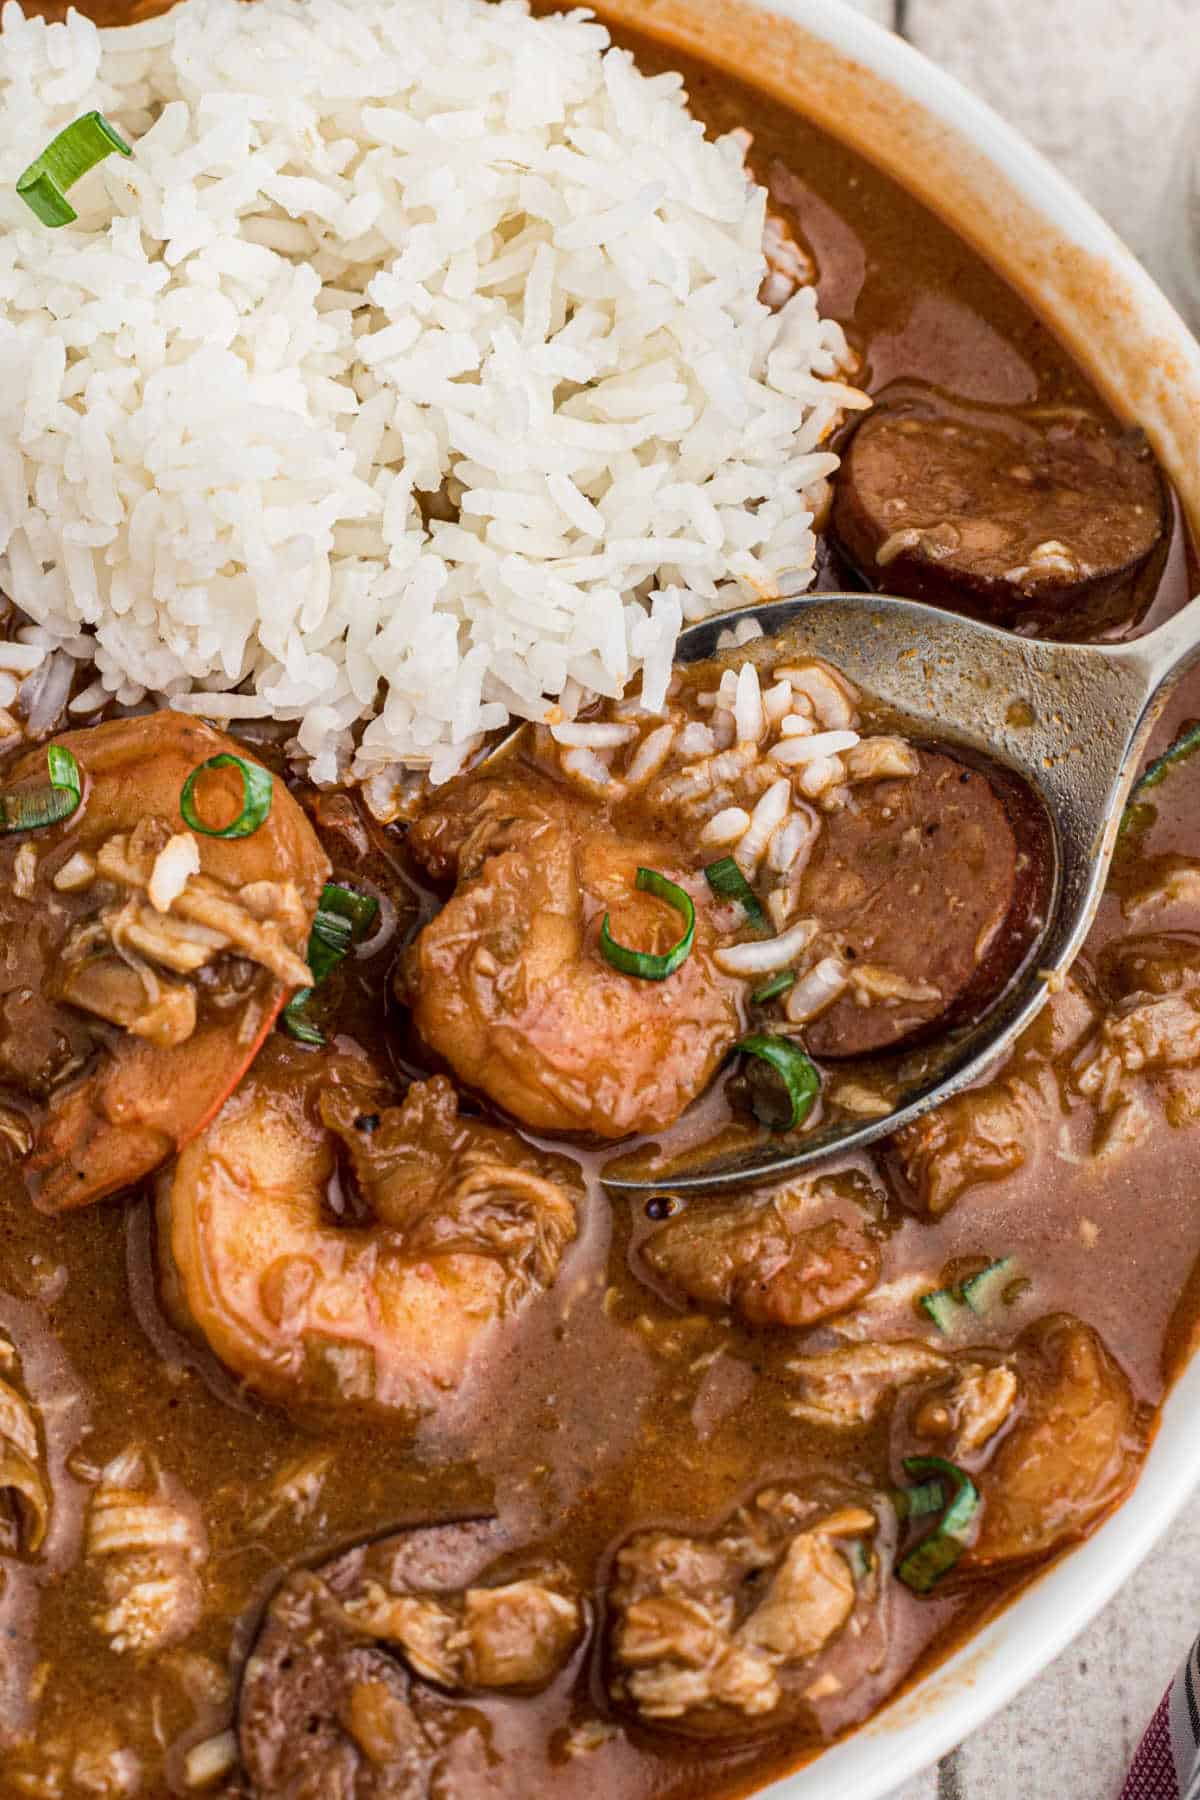 Louisiana seafood gumbo recipe close up of a bowl with some rice and a spoon digging in.